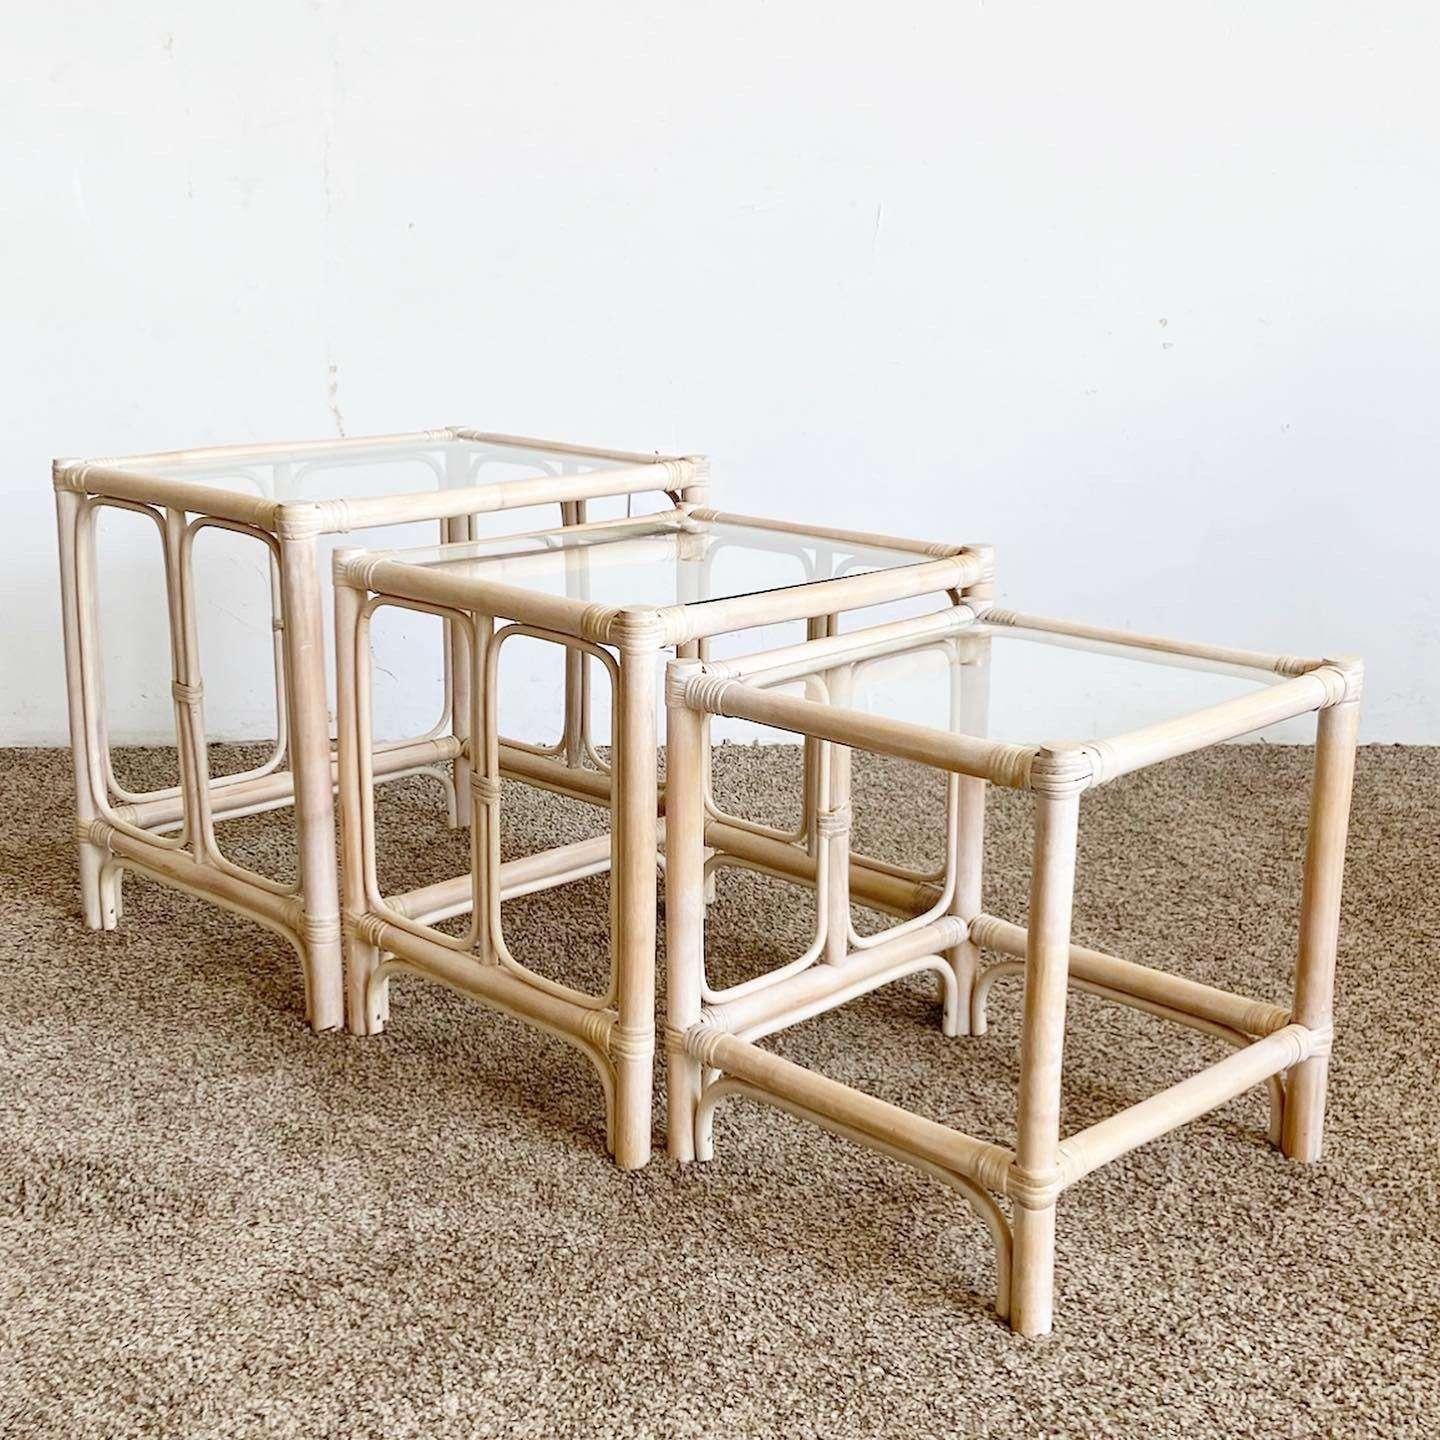 Excellent set of 3 vintage boho chic bamboo rattan nesting side tables. Each feature a white washed finish with inlaid glass tops.

Small table measures 16.75”W, 16”D, 17.75”H
Medium table measures 19.5”W, 17”D, 19.5”H